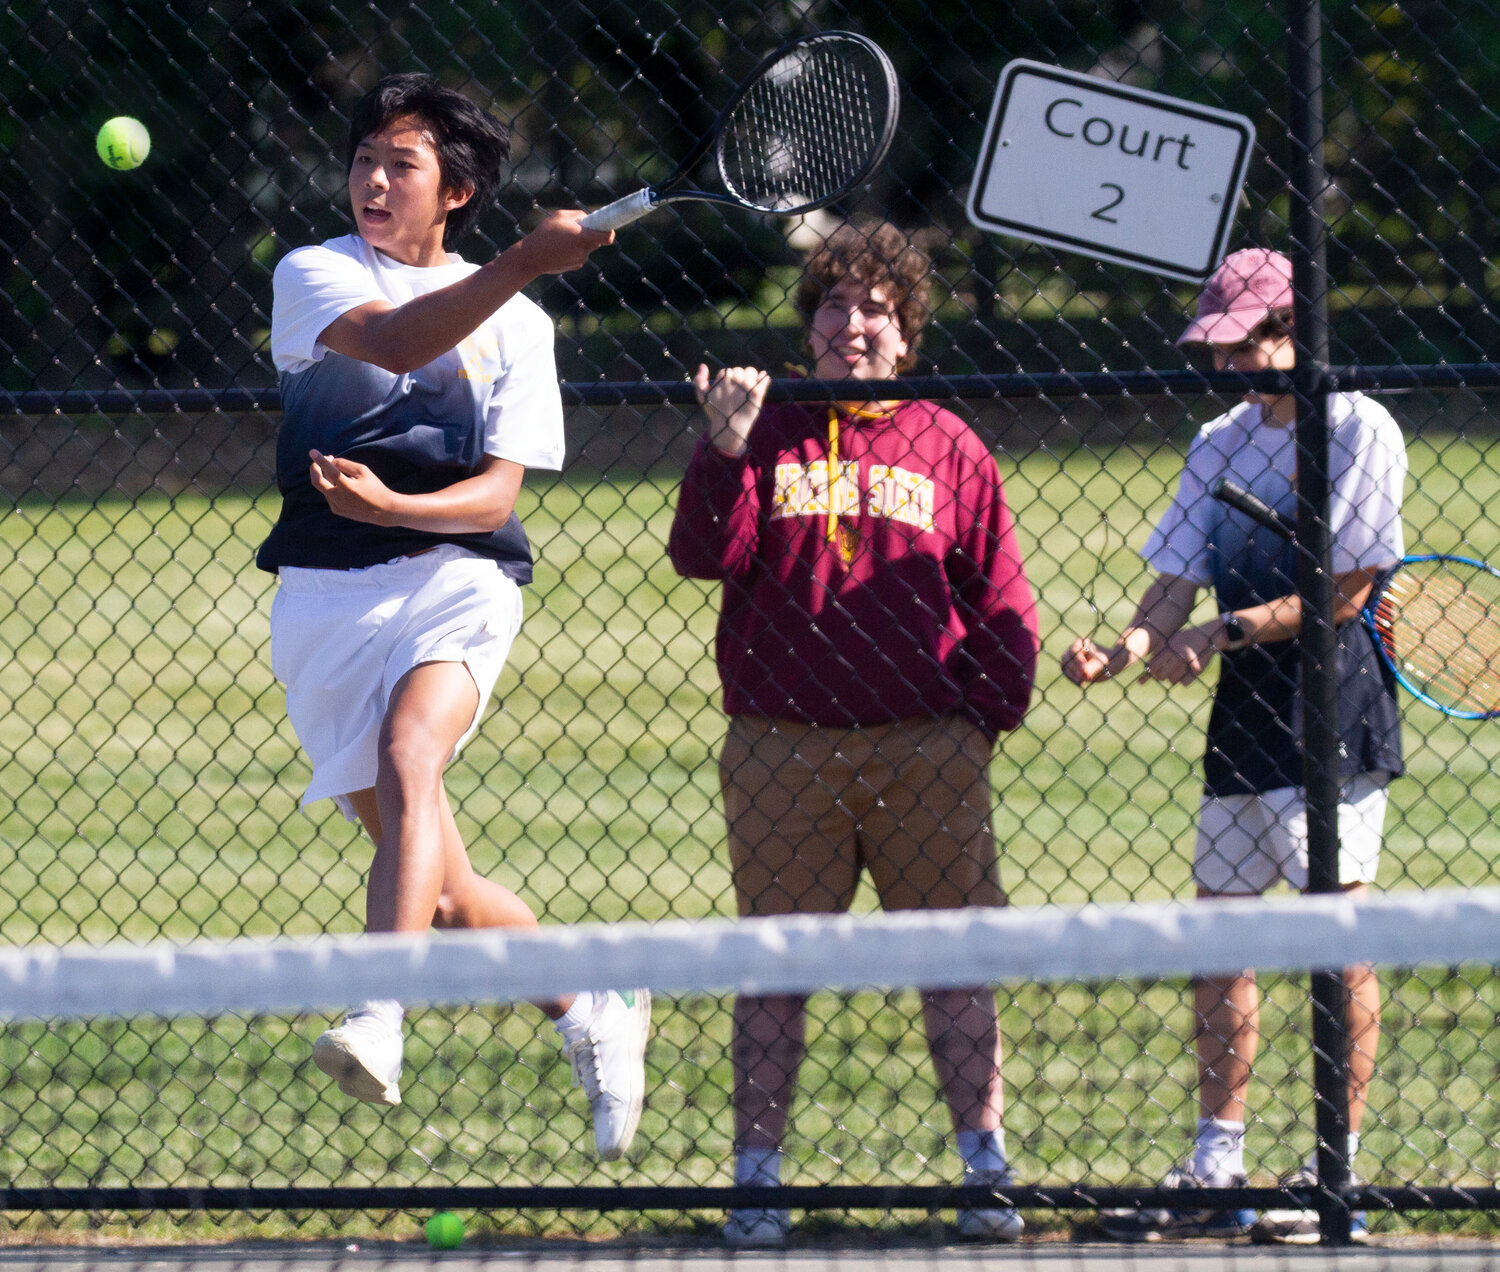 Barrington's Jeremy Kuo crushes a shot while fans watch just outside the fence. The Eagles knocked off Mount St. Charles 4-0 and advanced to the state finals.